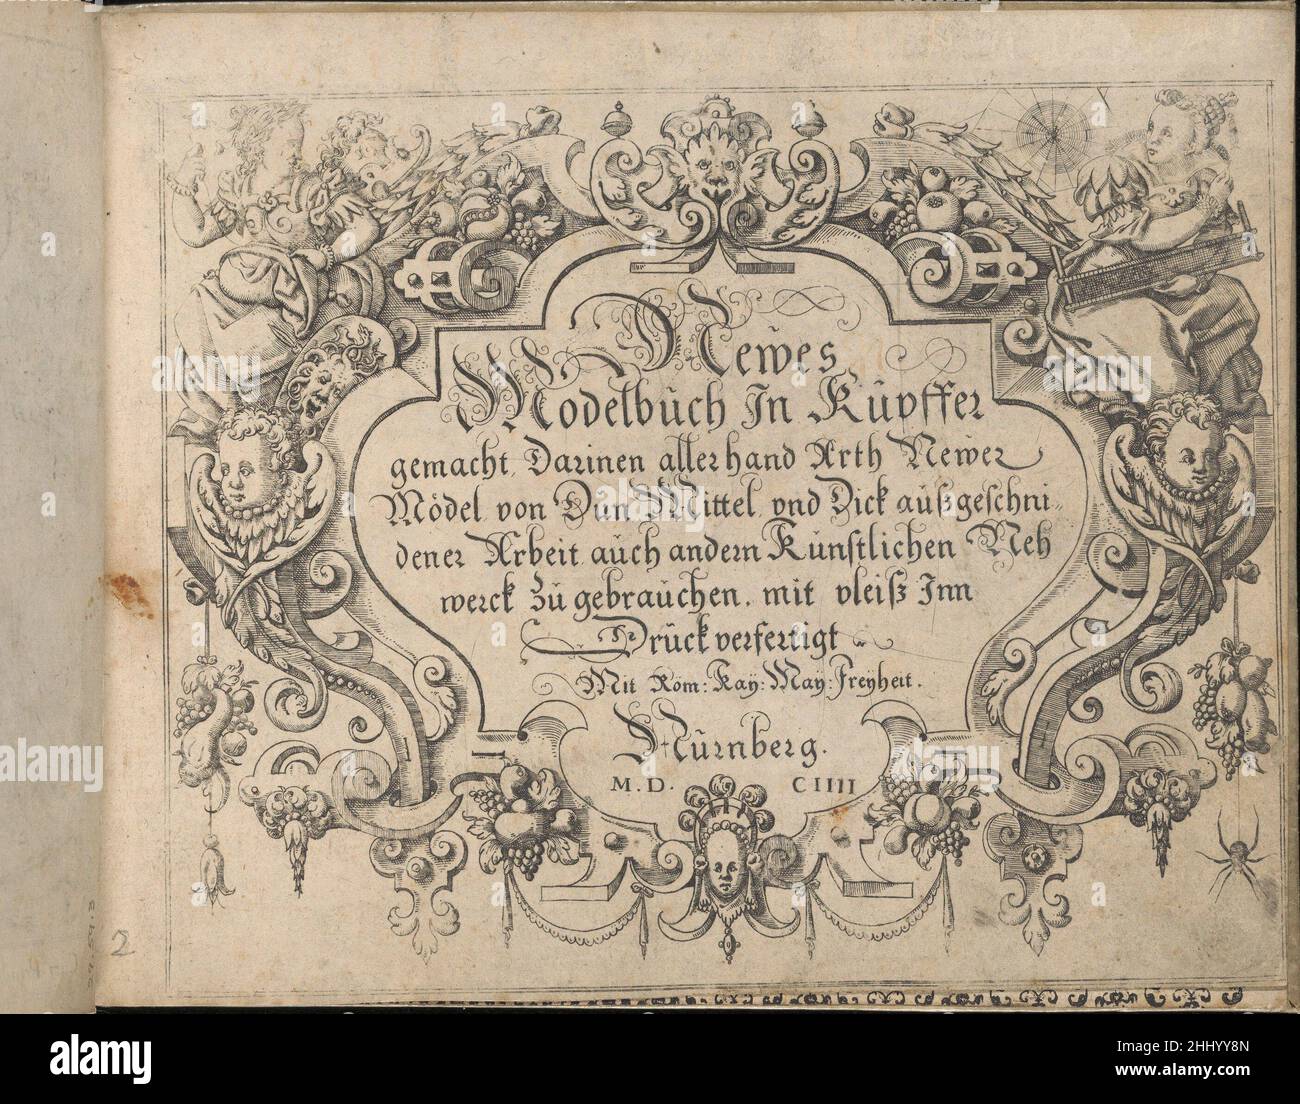 Newes Modelbuch in Kupffer (second title page, 2r) 1604 Johann Sibmacher German Designed by Johann Sibmacher, German, active 1590-1611.2 illustrated title pages, 12 pages of text surrounded by decorative borders, and 56 pages of designs.. Newes Modelbuch in Kupffer (second title page, 2r)  682021 Stock Photo